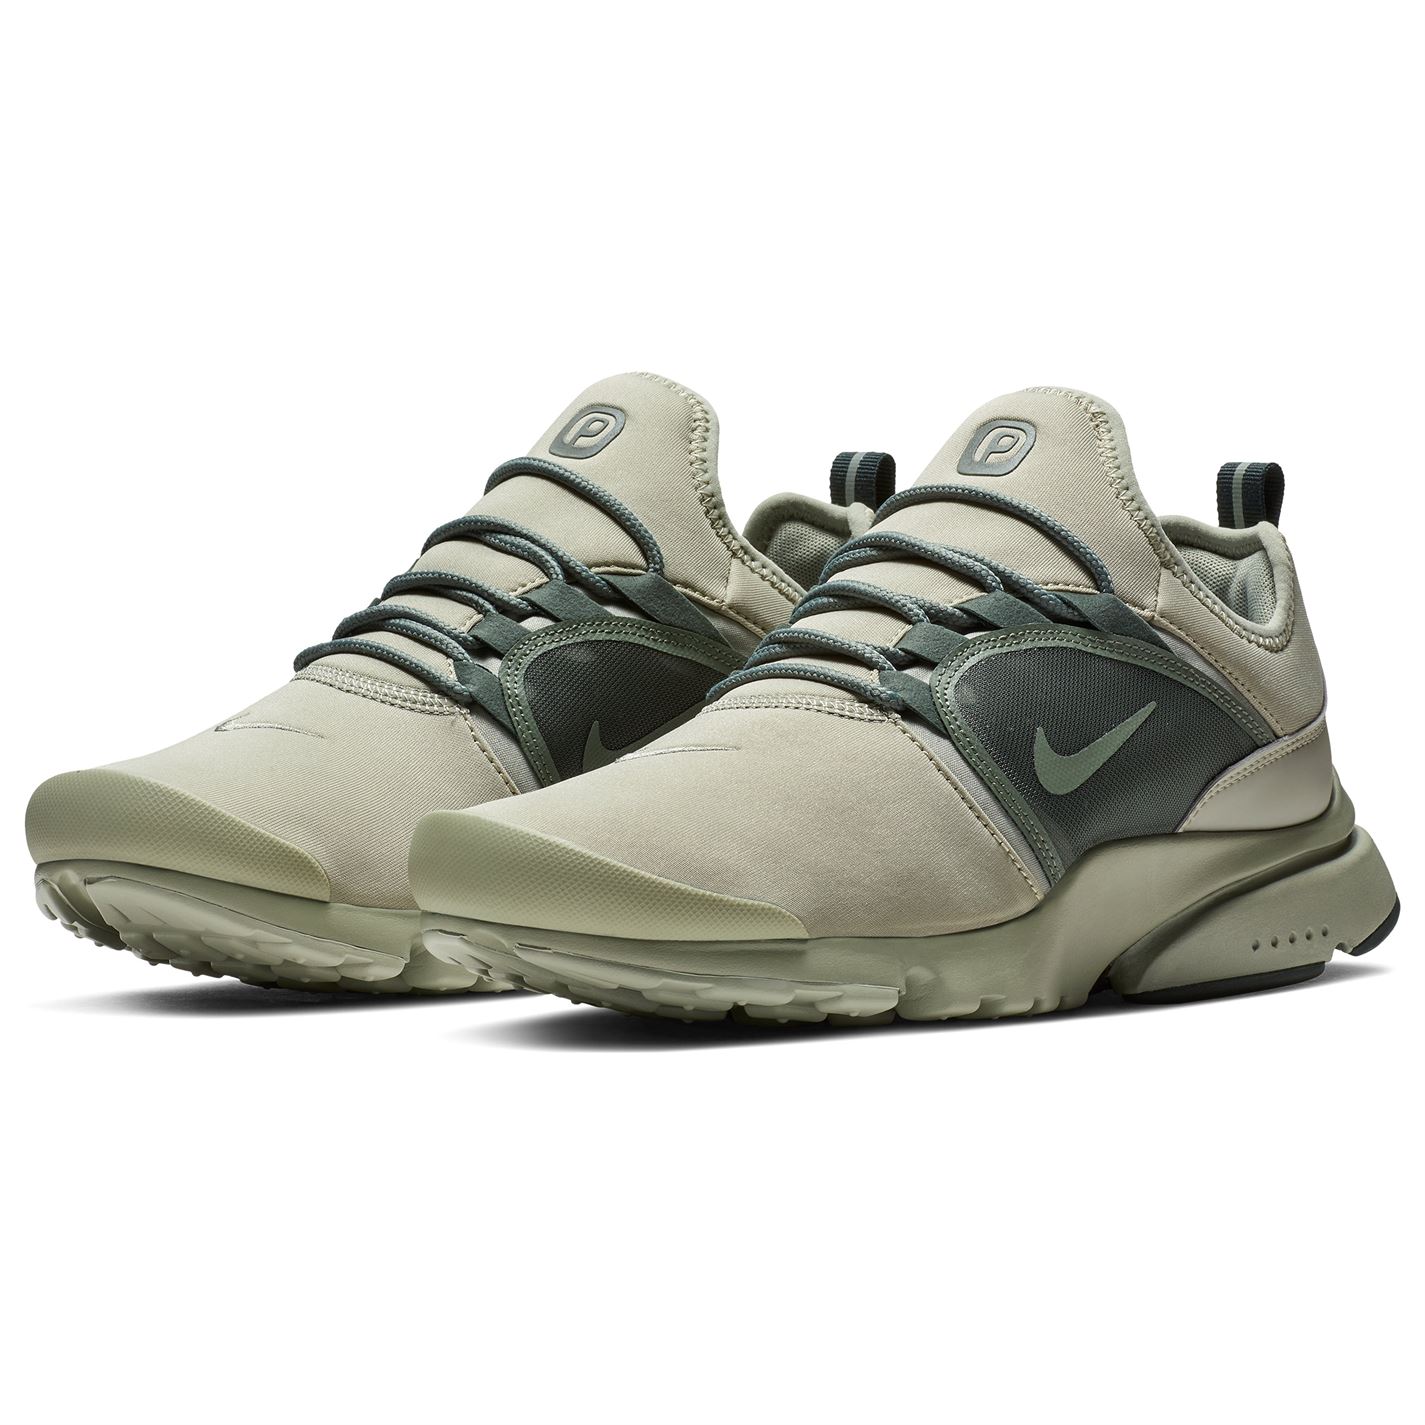 Nike Presto Fly Trainers Mens